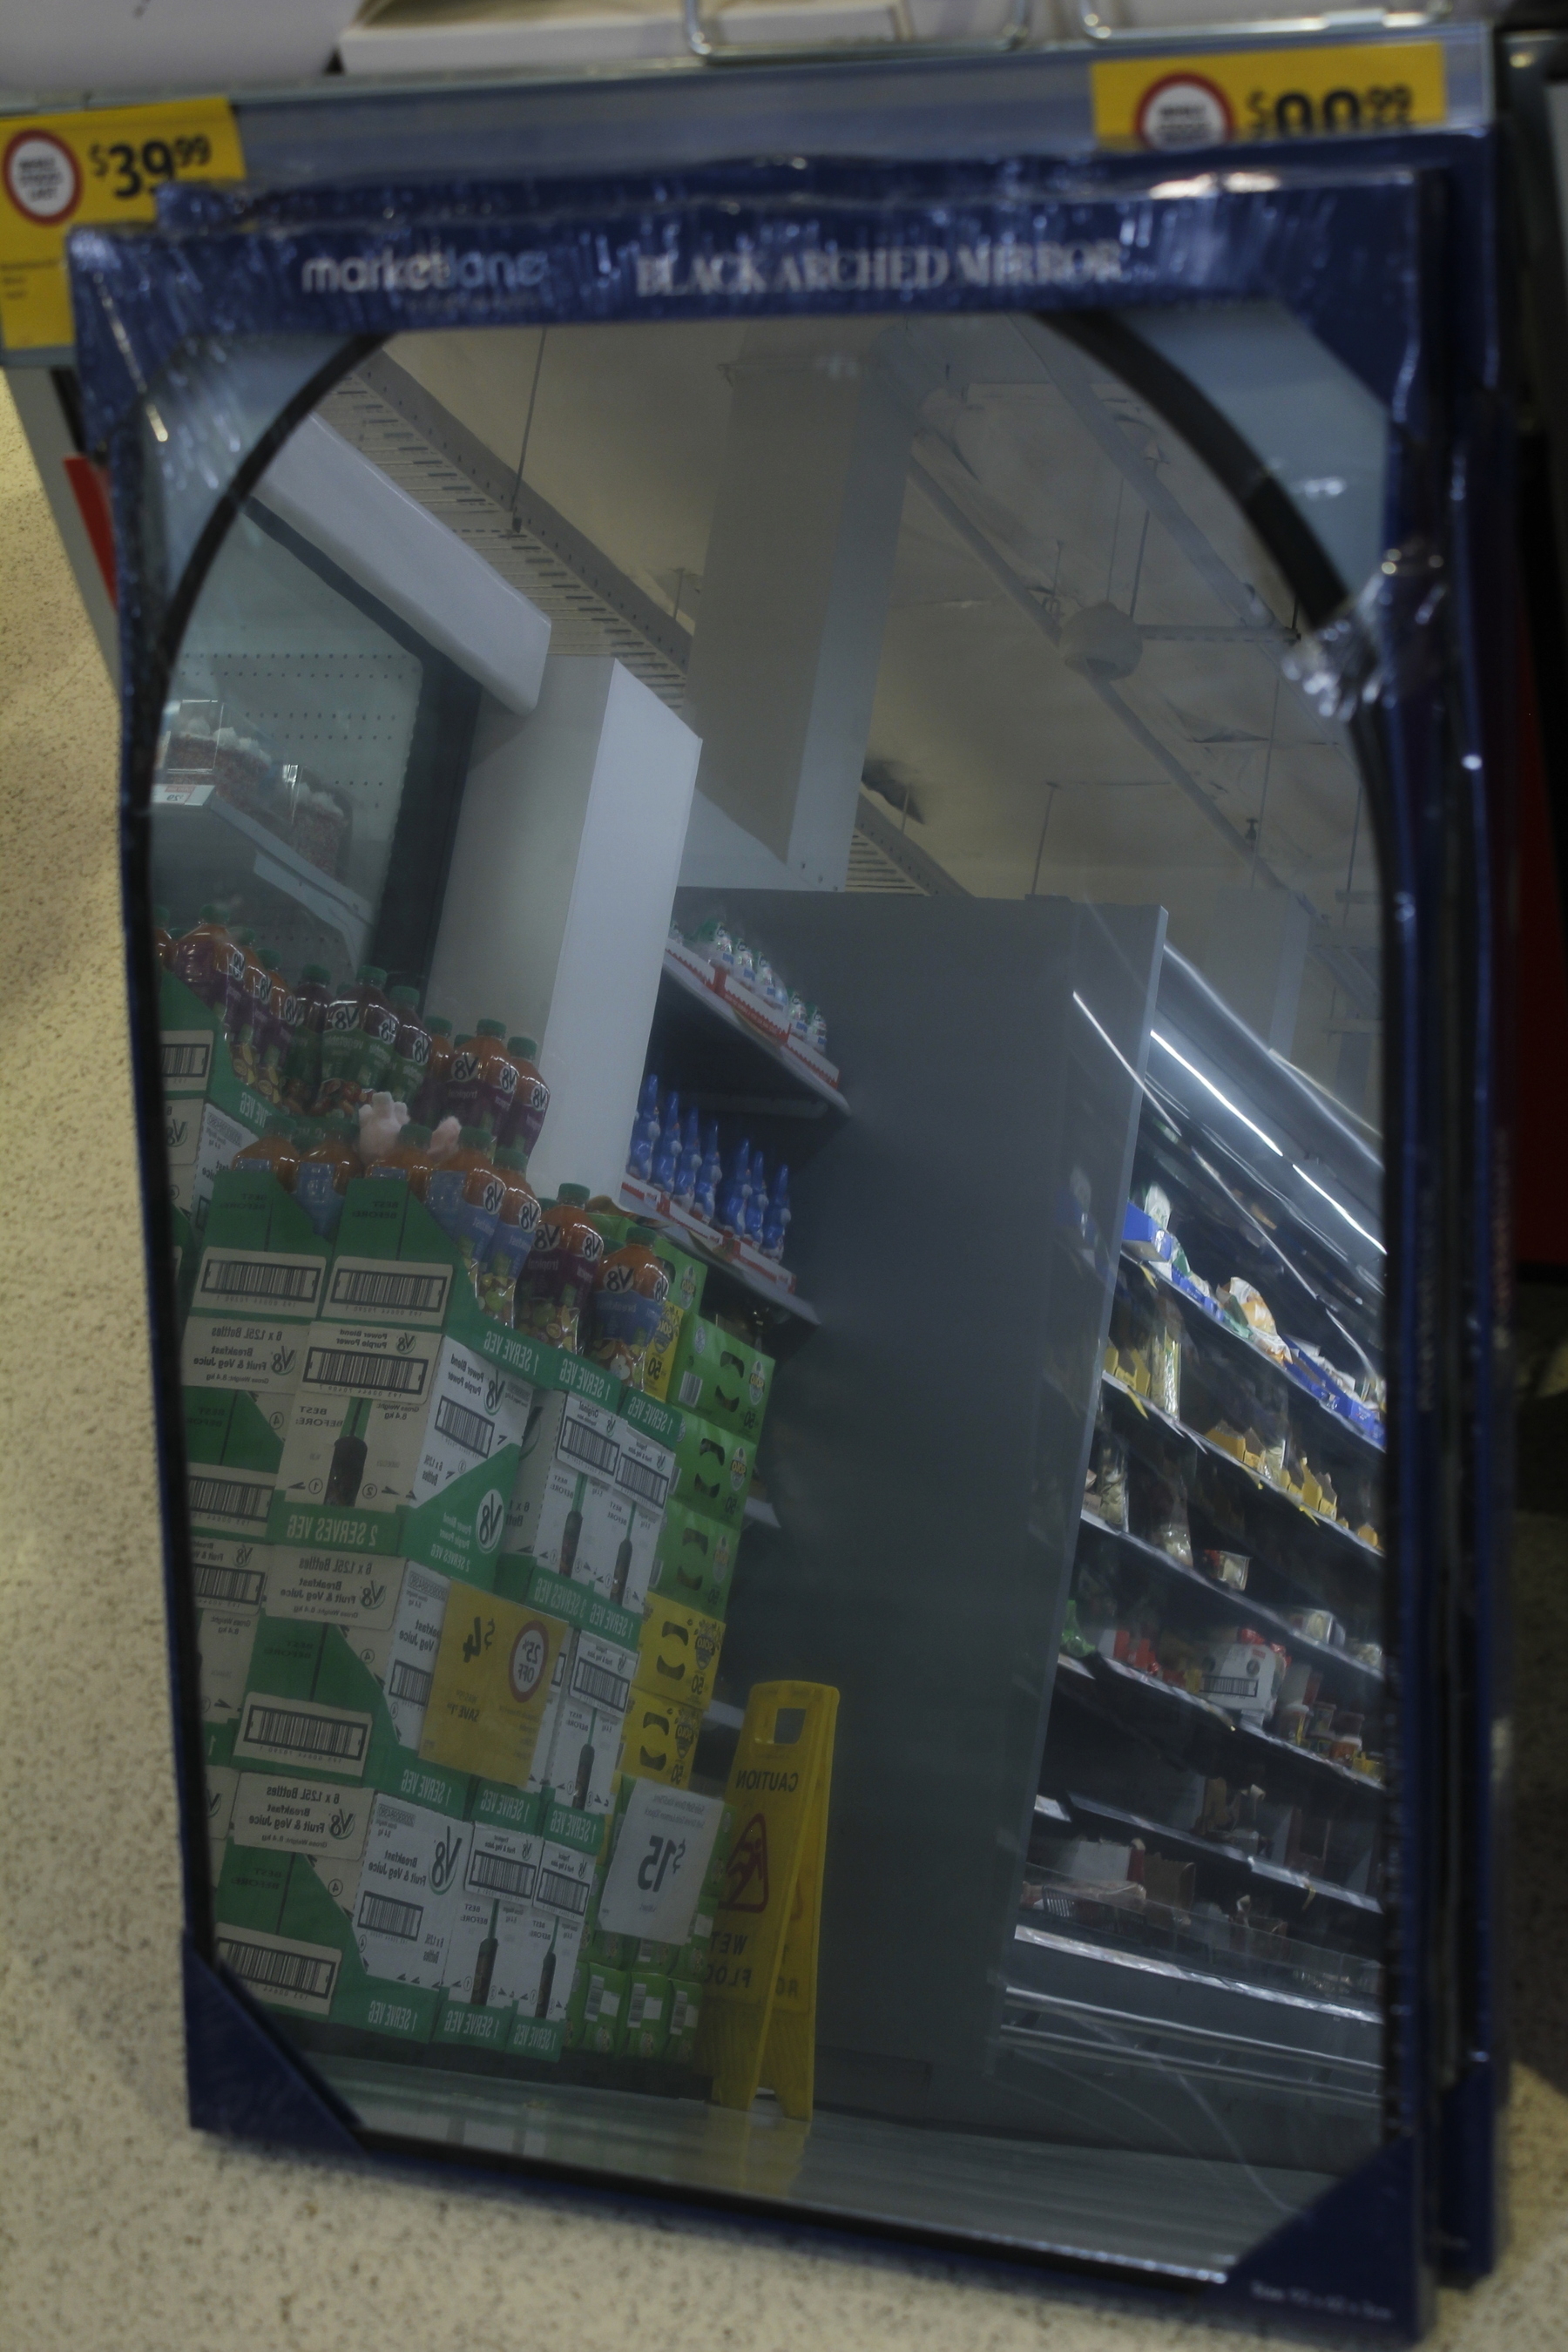 An arched, black-framed mirror stands in its packaging on a speckled floor, leaning so that everything reflected is also on an angle. Inside the frame, in reverse, are green boxes of V8 drinks stacked up at the side of a fridge, two shelves containing Easter eggs and chocolate Easter bunnies, and a big grey rack of open, refrigerated shelving full of boxes and packets lit by fluorescent tubes. A wide, straight-sided metal flue rises to a grey industrial ceiling with sprinklers, hanging lights and other attachments.